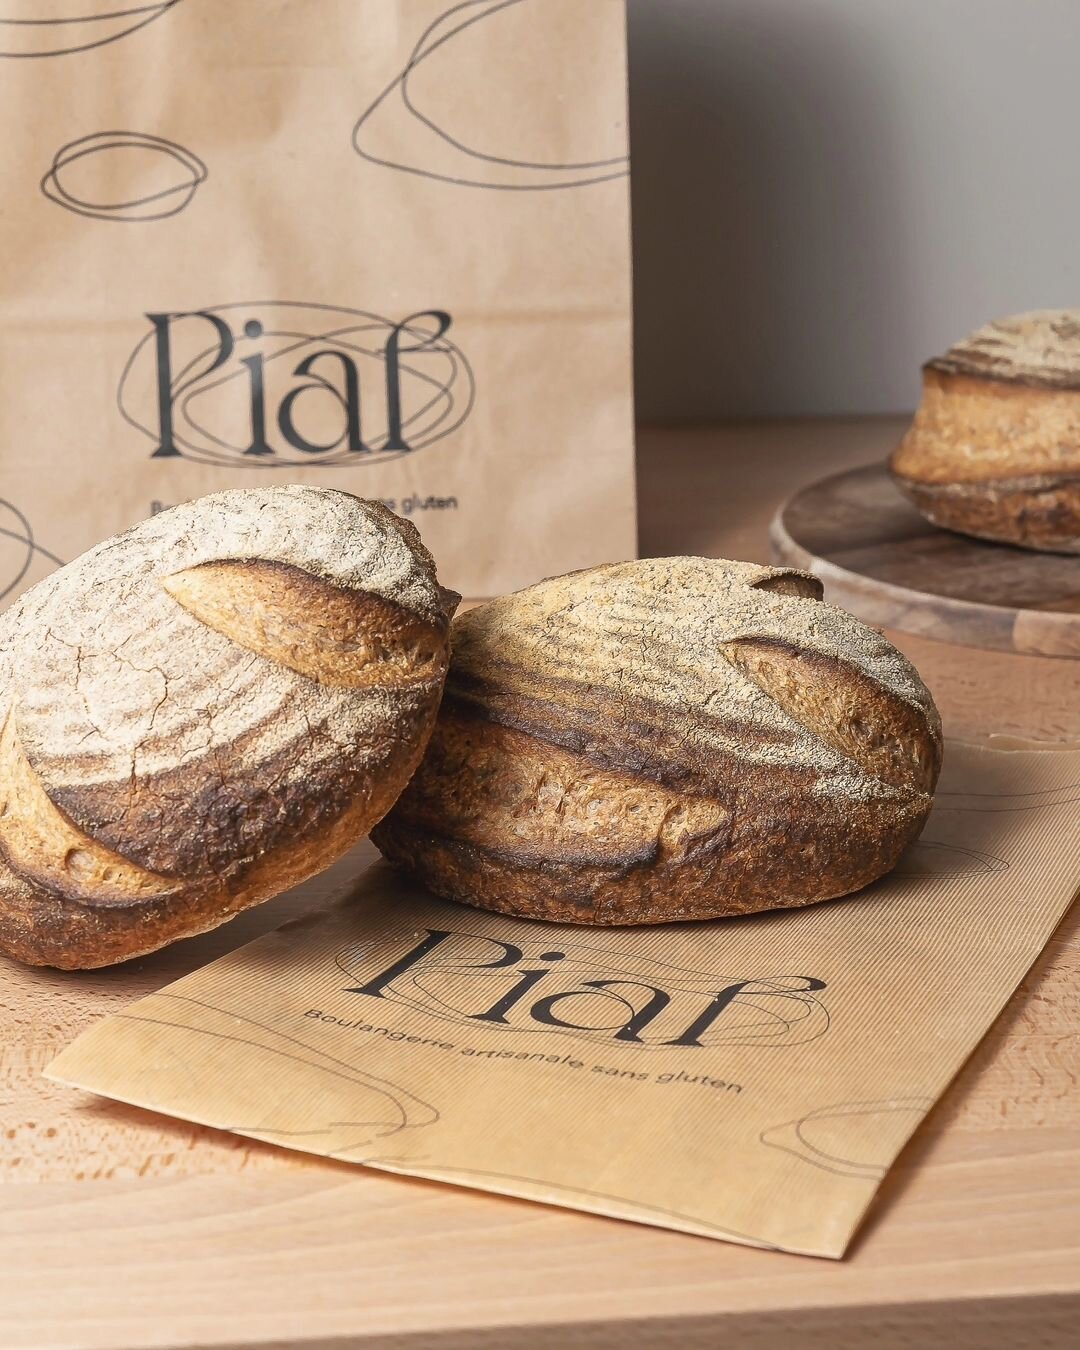 Hungry? 🥖 Exciting news, @piaf_glutenfree is now delivering all over Switzerland! 
Get ready for more accessible and delicious gluten-free options delivered right to your doorstep no matter whether you live in Fribourg, Lausanne or Zurich #KioskAgen